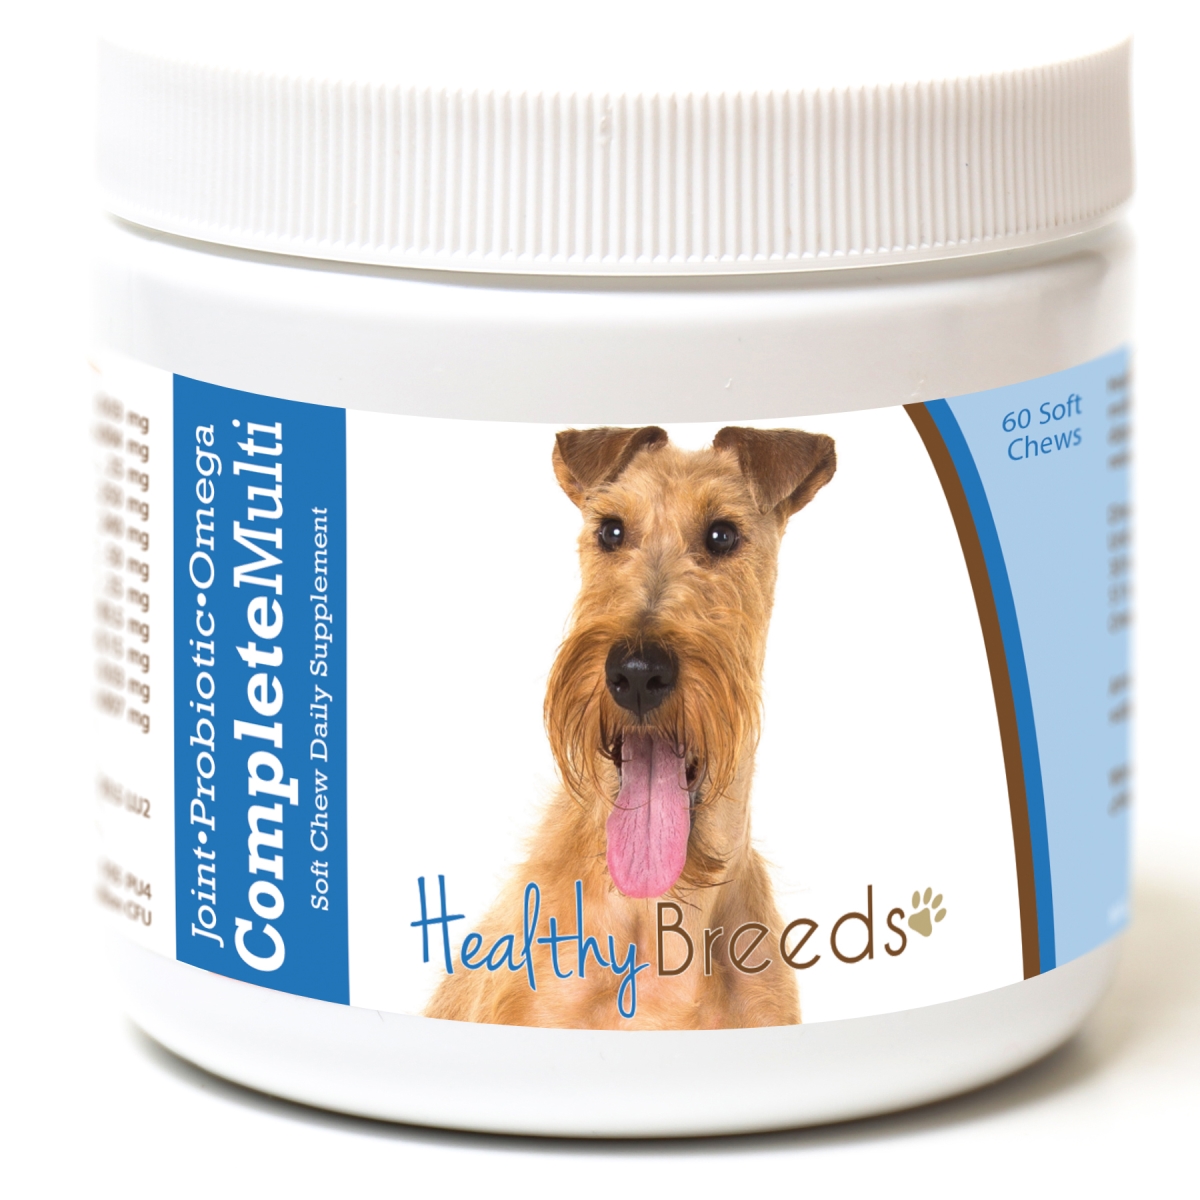 Picture of Healthy Breeds 192959008227 Irish Terrier All in One Multivitamin Soft Chew - 60 Count